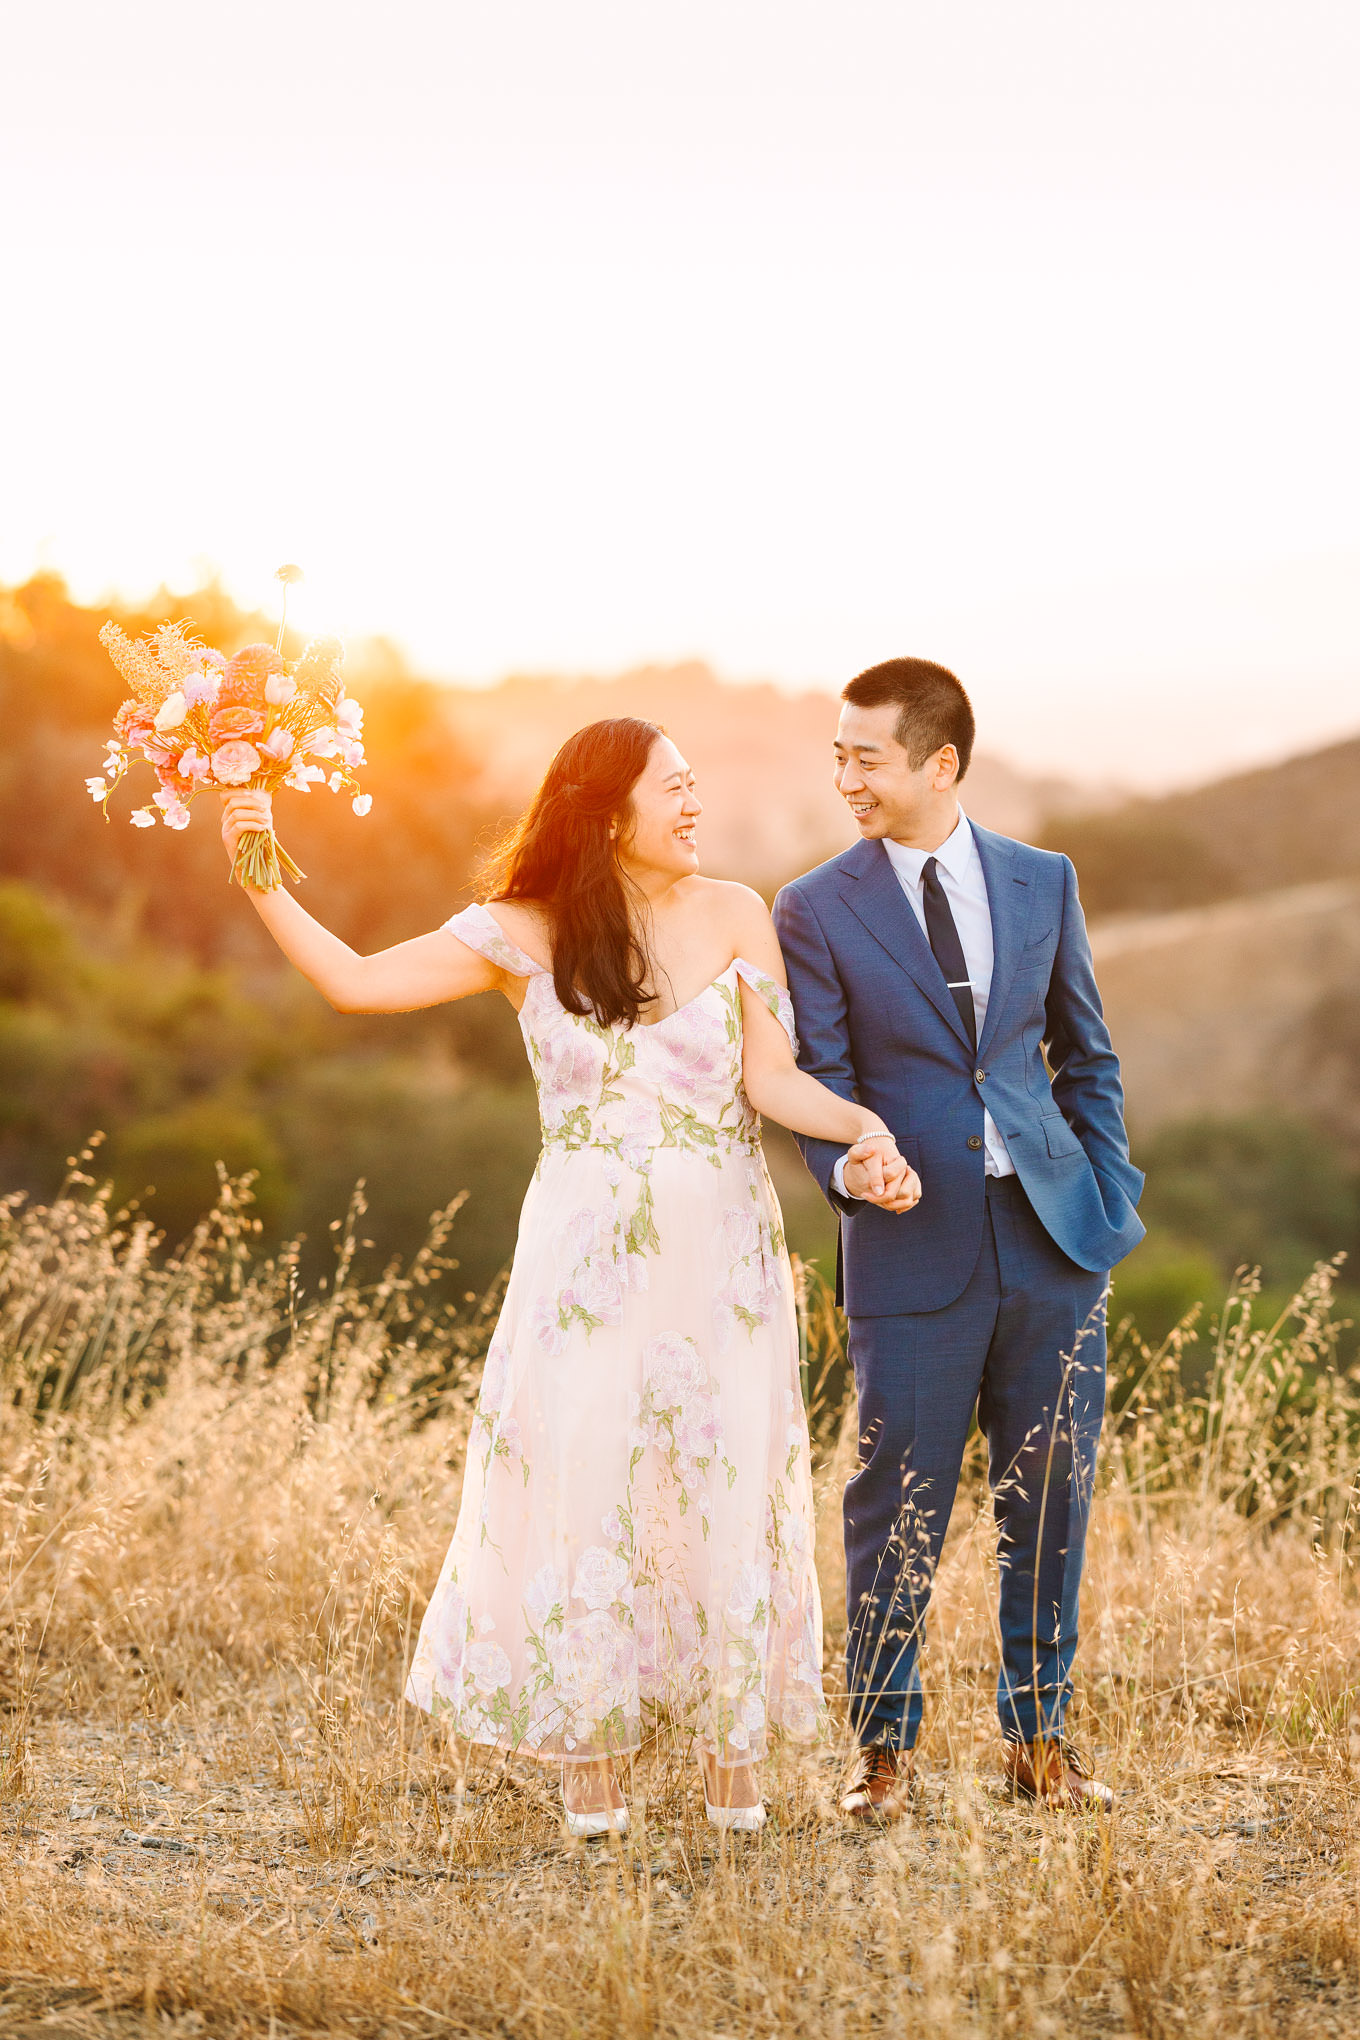 TreePeople sunset elopement | Wedding and elopement photography roundup | Los Angeles and Palm Springs photographer | #losangeleswedding #palmspringswedding #elopementphotographer Source: Mary Costa Photography | Los Angeles